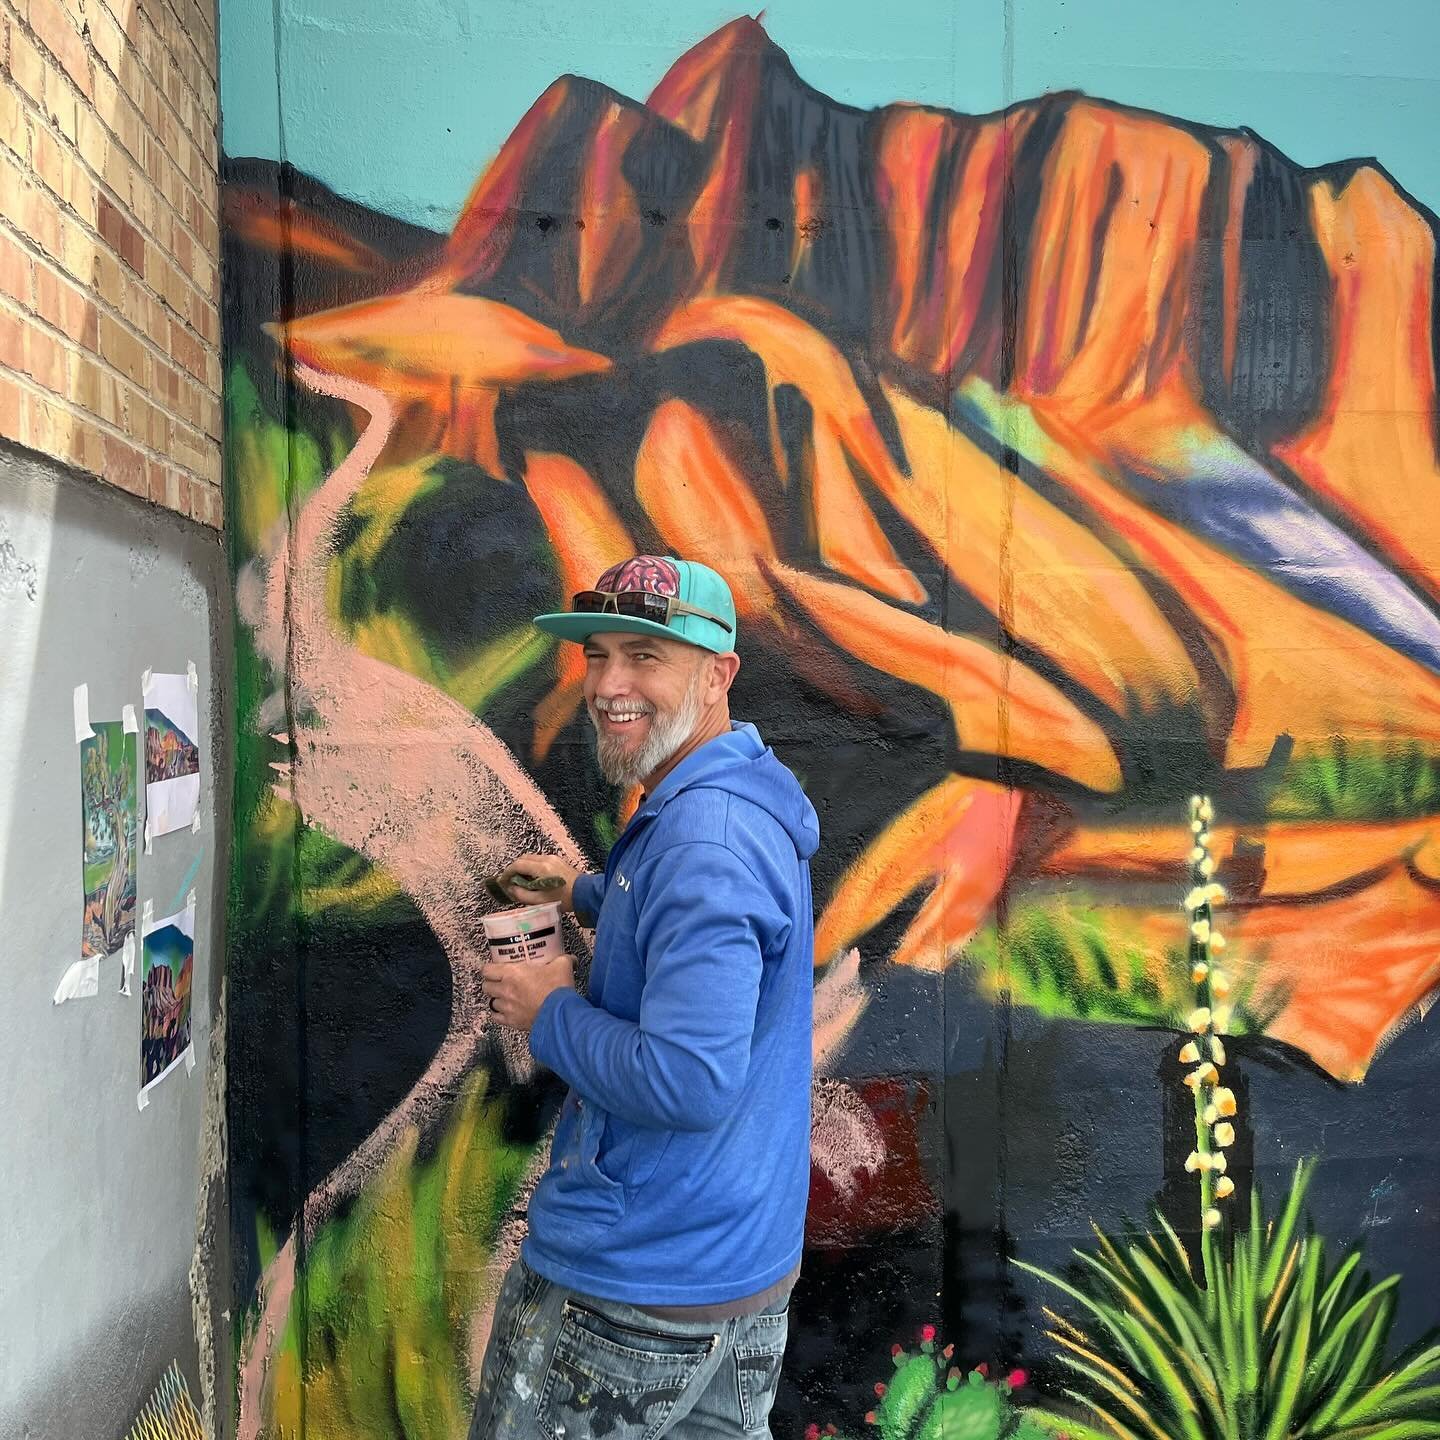 A dinosaur made their new home at @visualartinstitute this week! 🦖🦕 

Check out the new addition to a colorful mural on our South Salt Lake building, created by the amazing @jpearceart ! Come see it for yourself 😍. We are located at 2900 S 300 W i